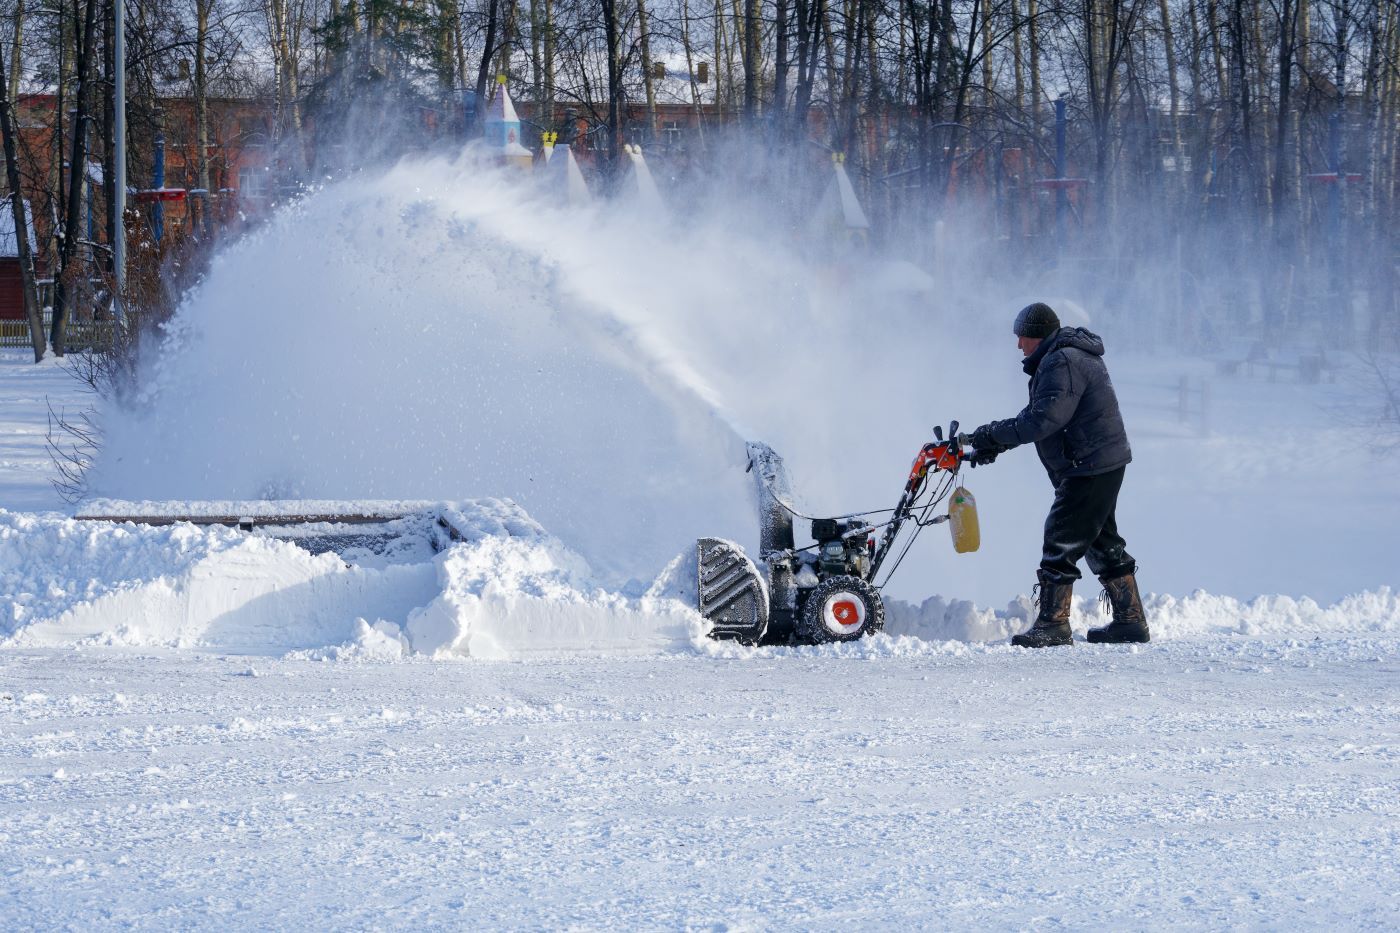 An image of a person using a snow blower to clear snow